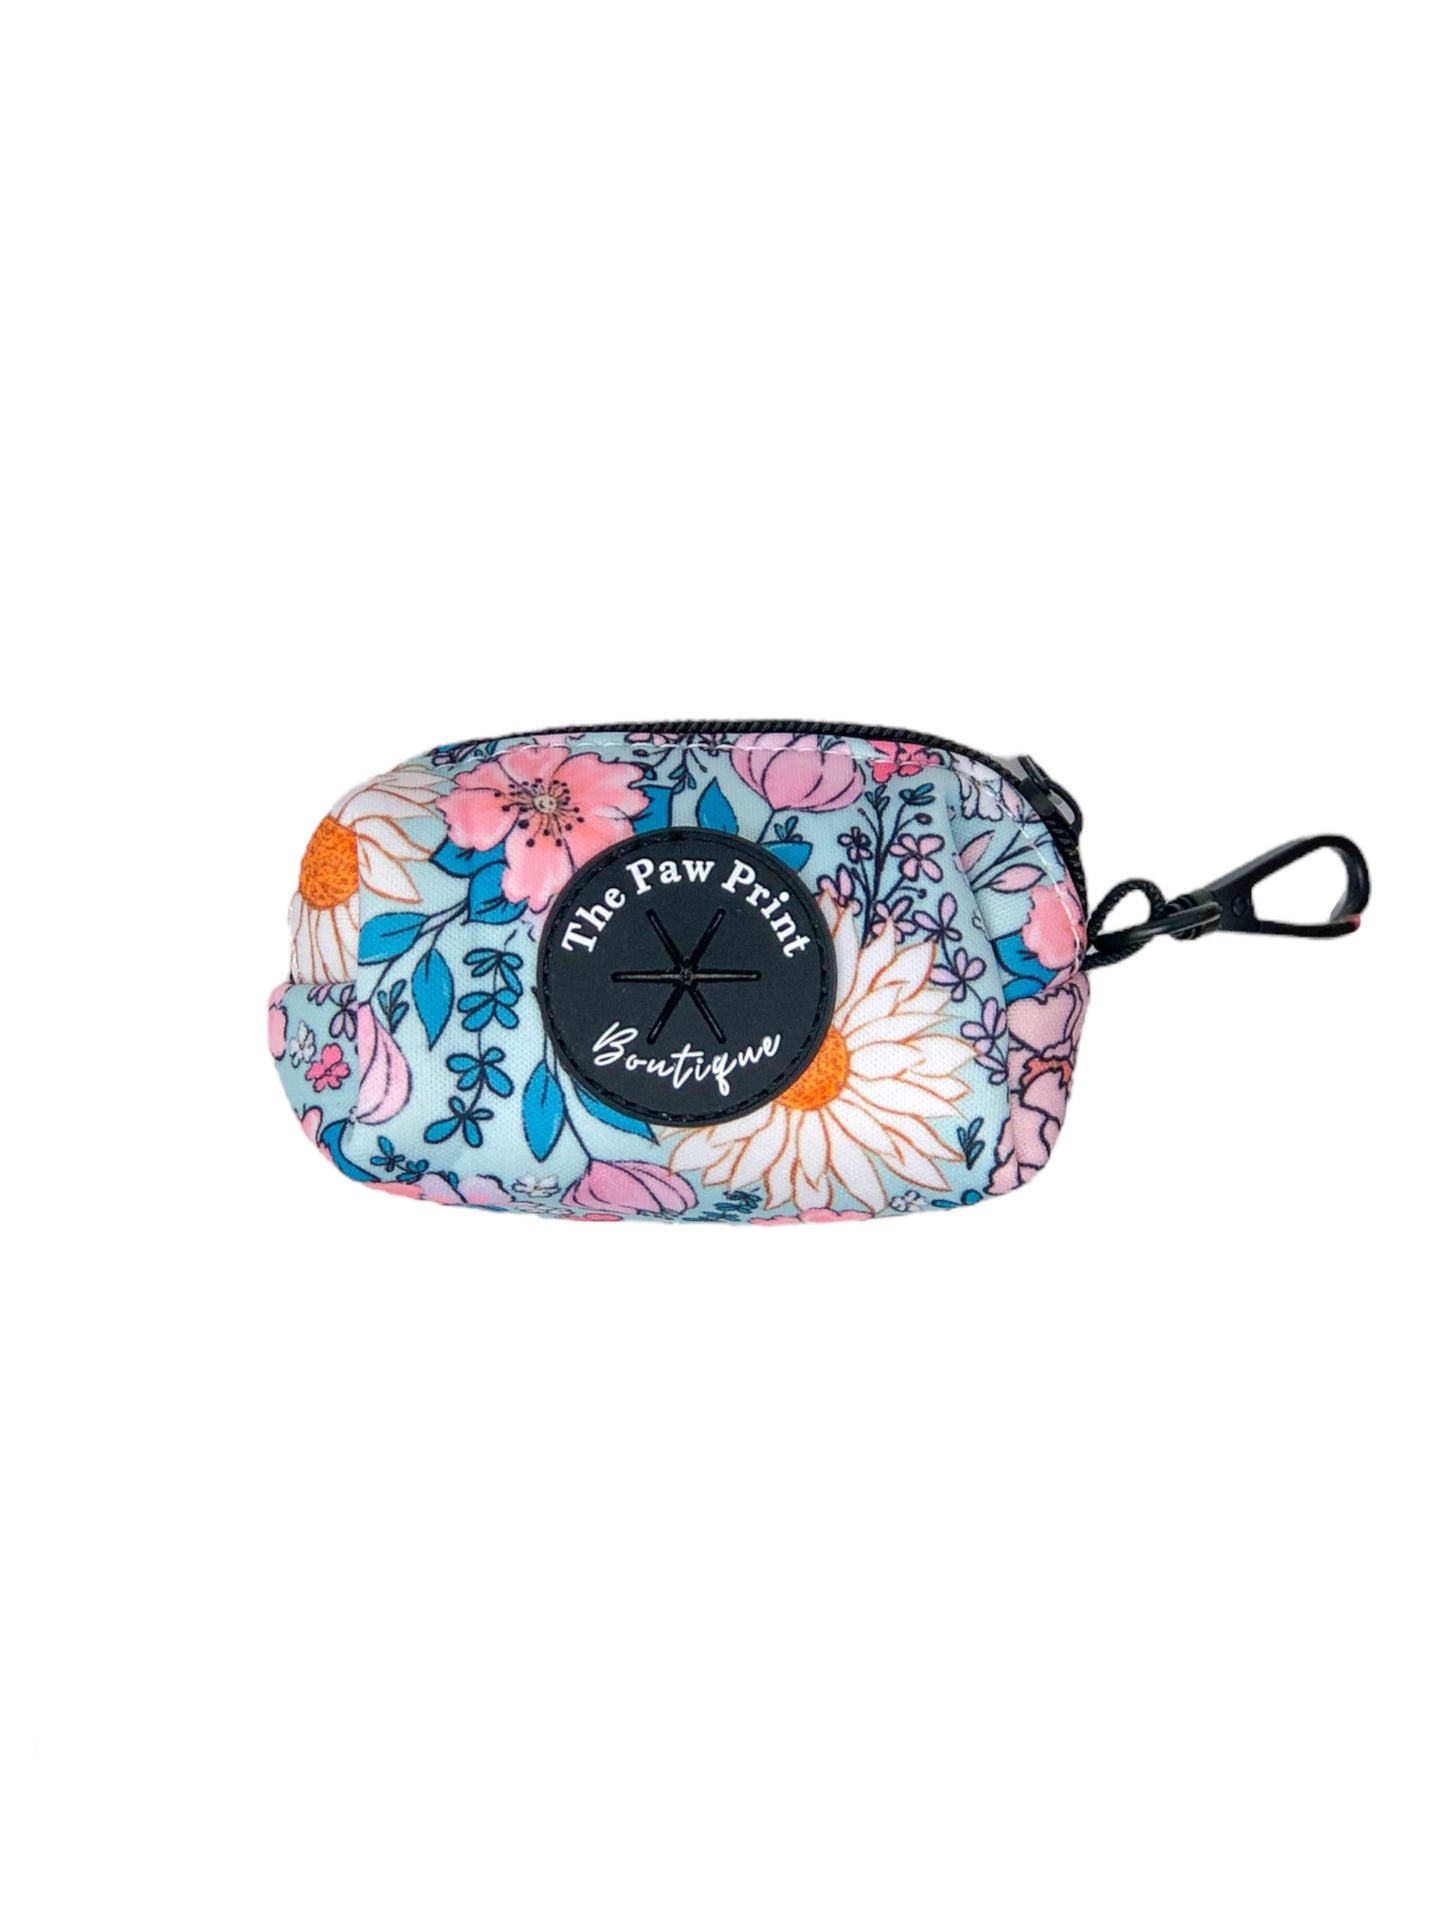 The Fabulous in Floral Poo Bag Holder